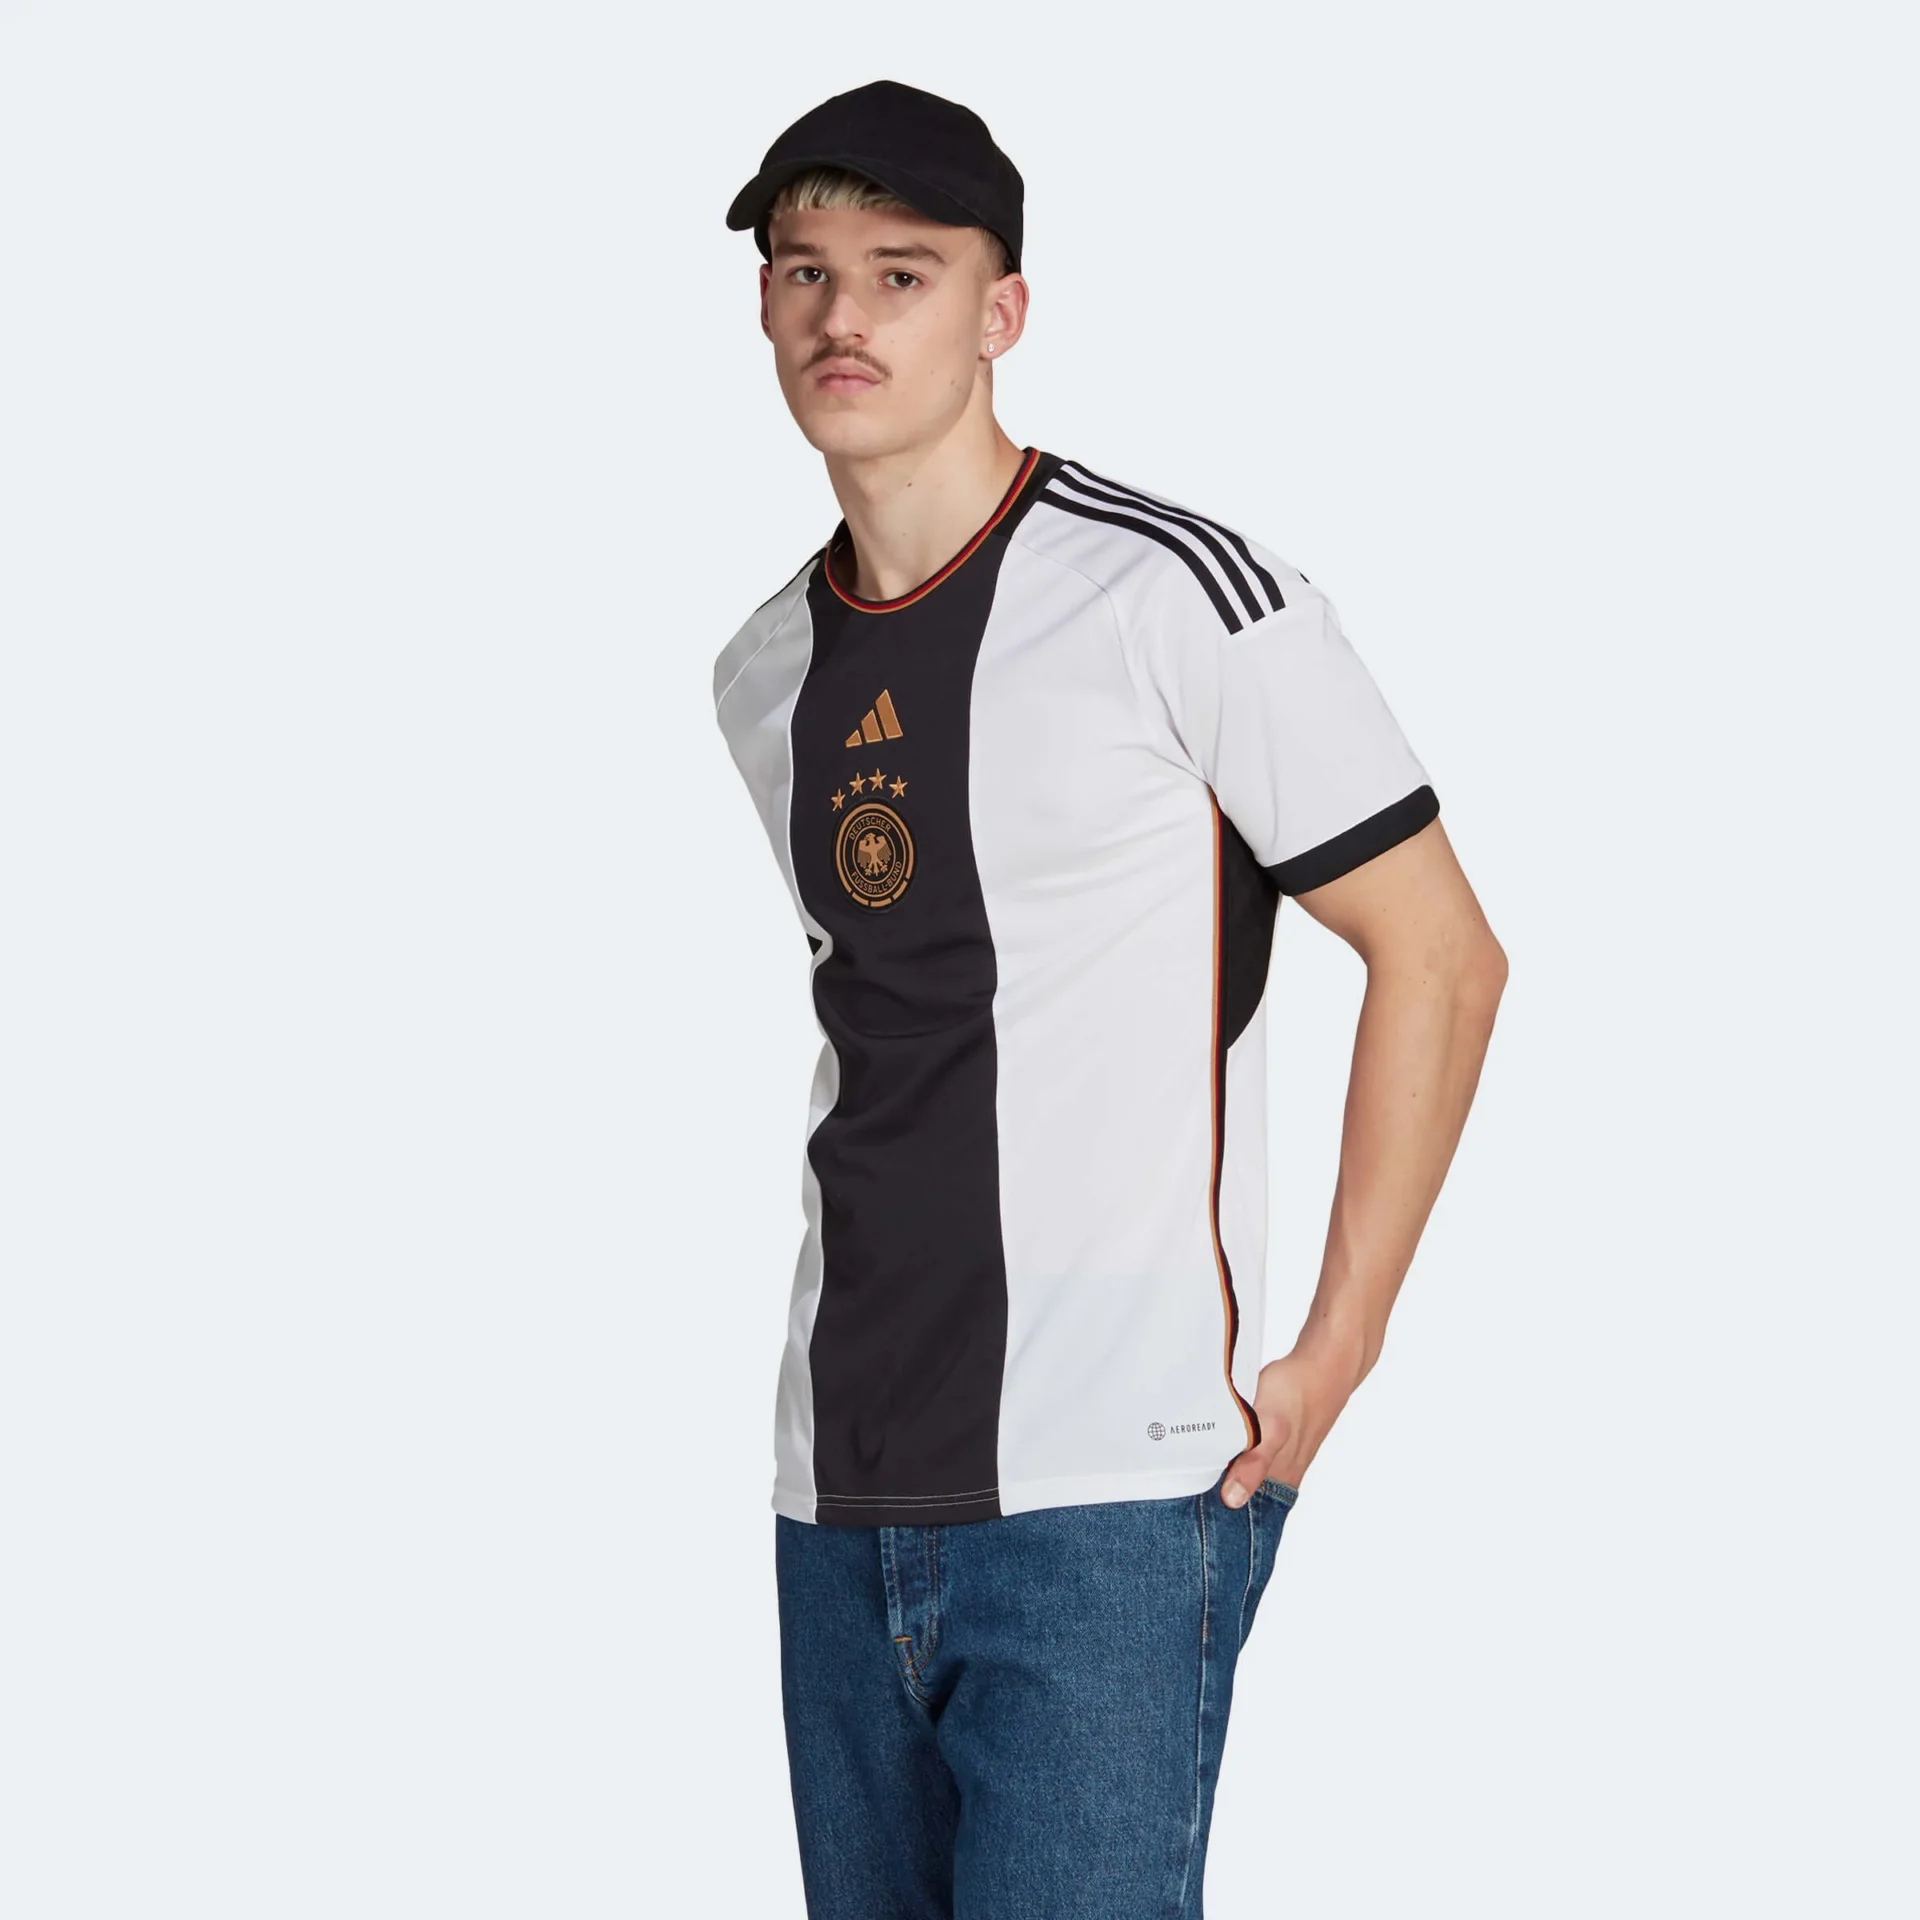 Adidas Men's Germany 2022 Home Jersey - White, 2XL